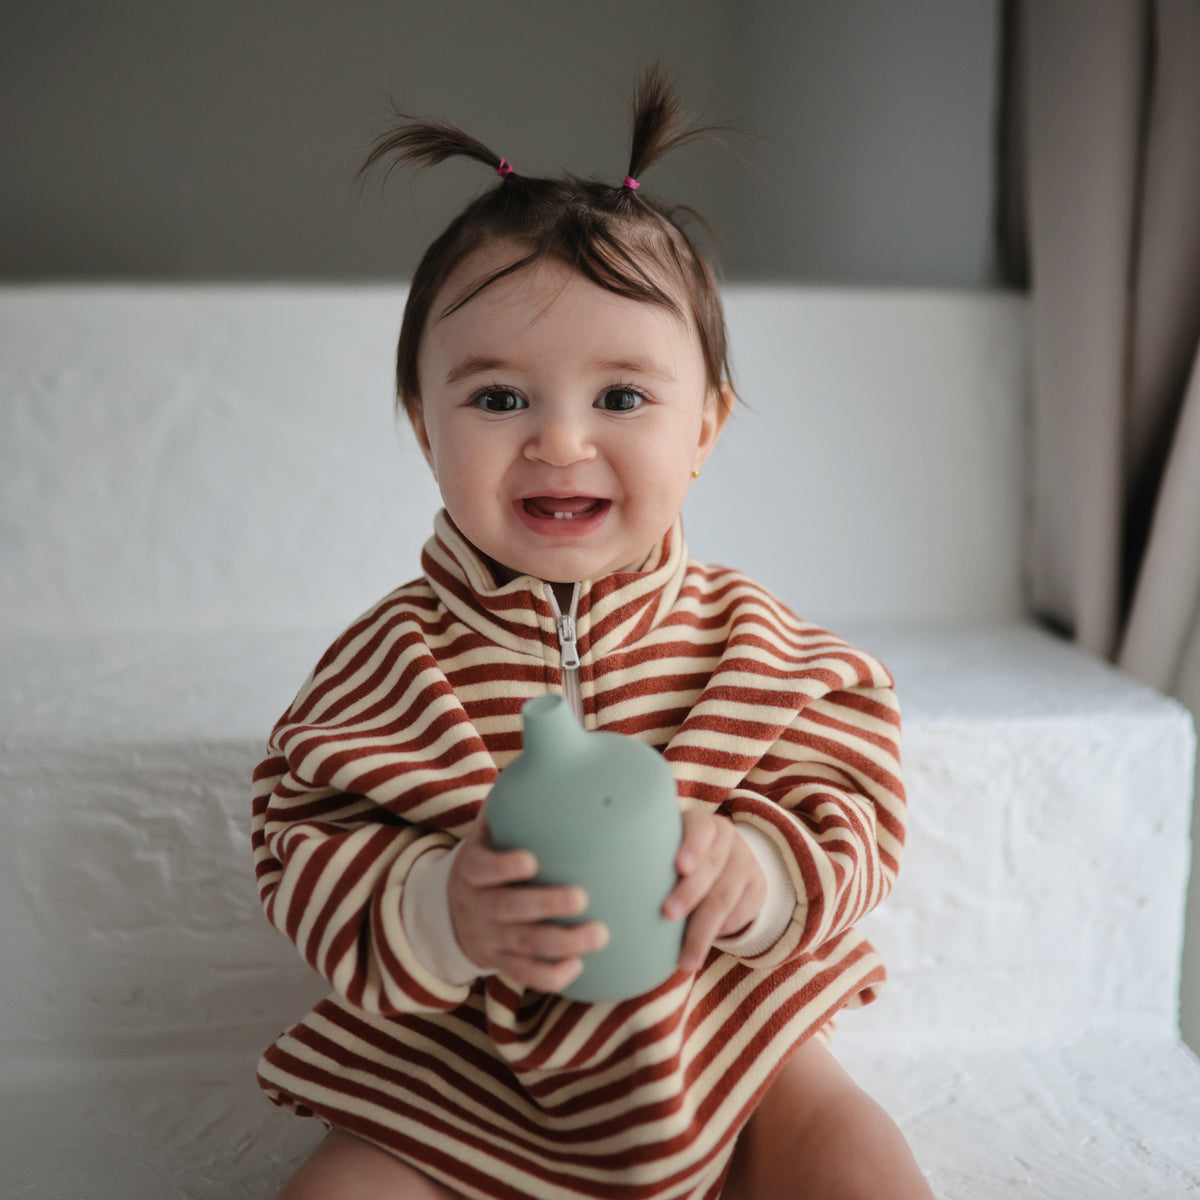 Mushie - Silicone Sippy Cup, Blush